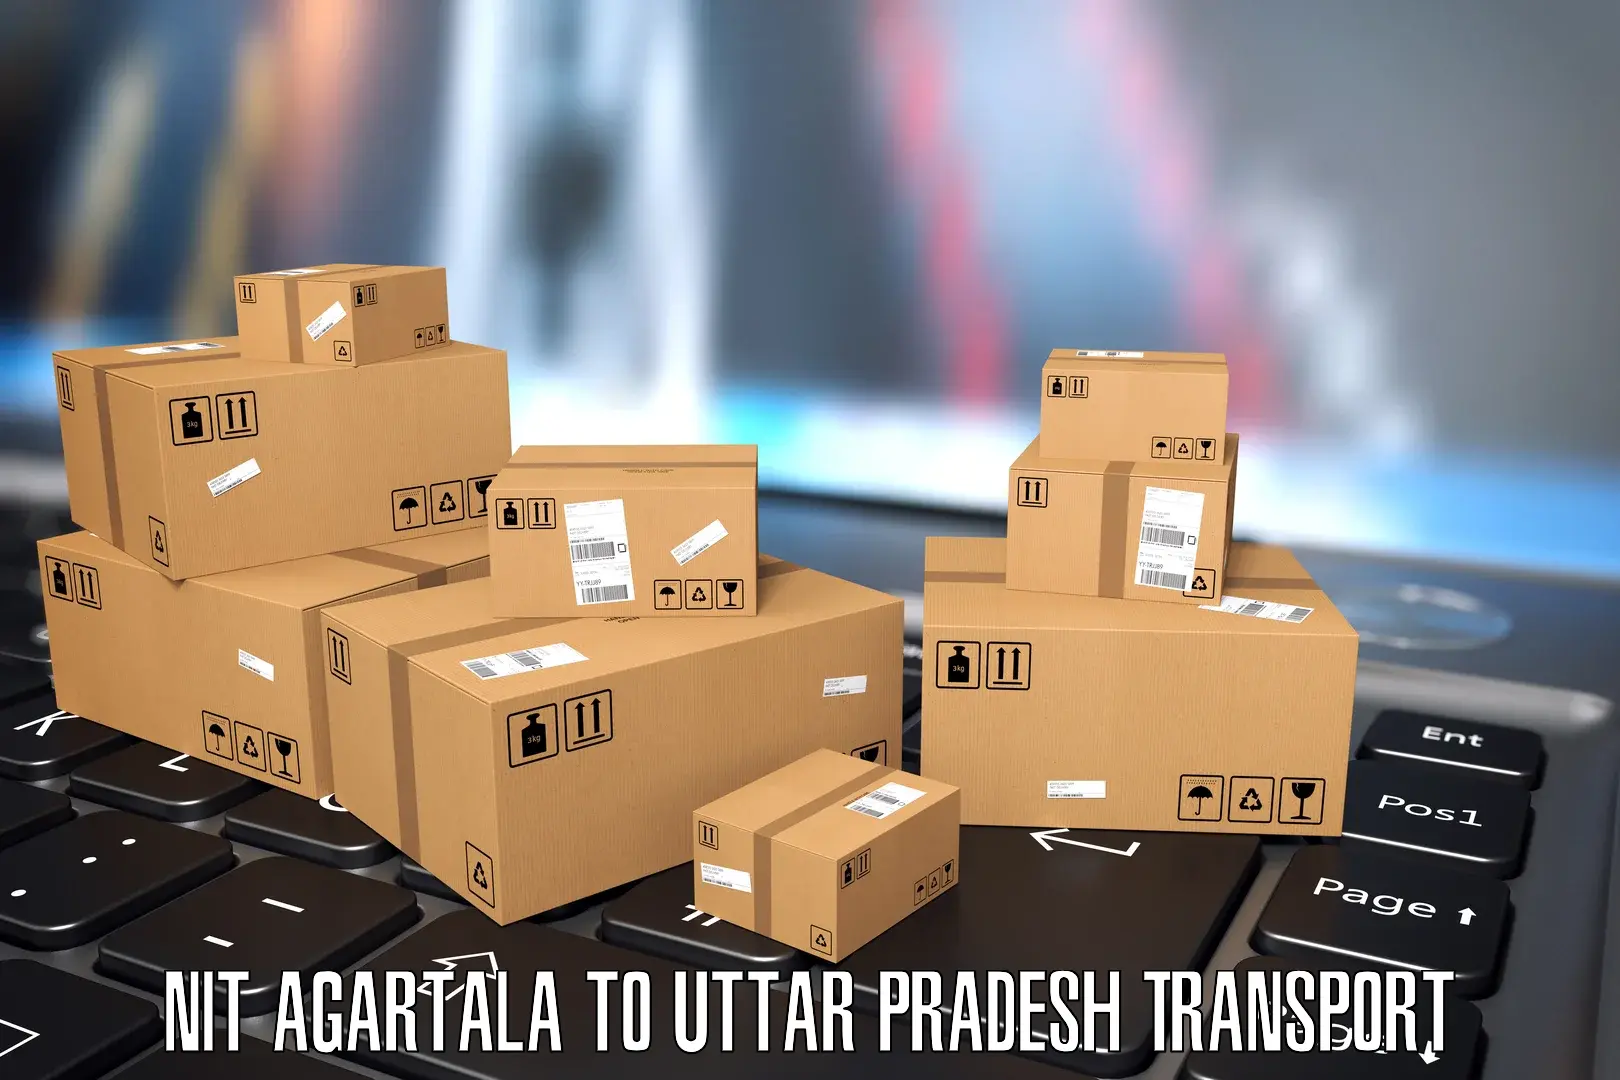 Air freight transport services in NIT Agartala to Khalilabad